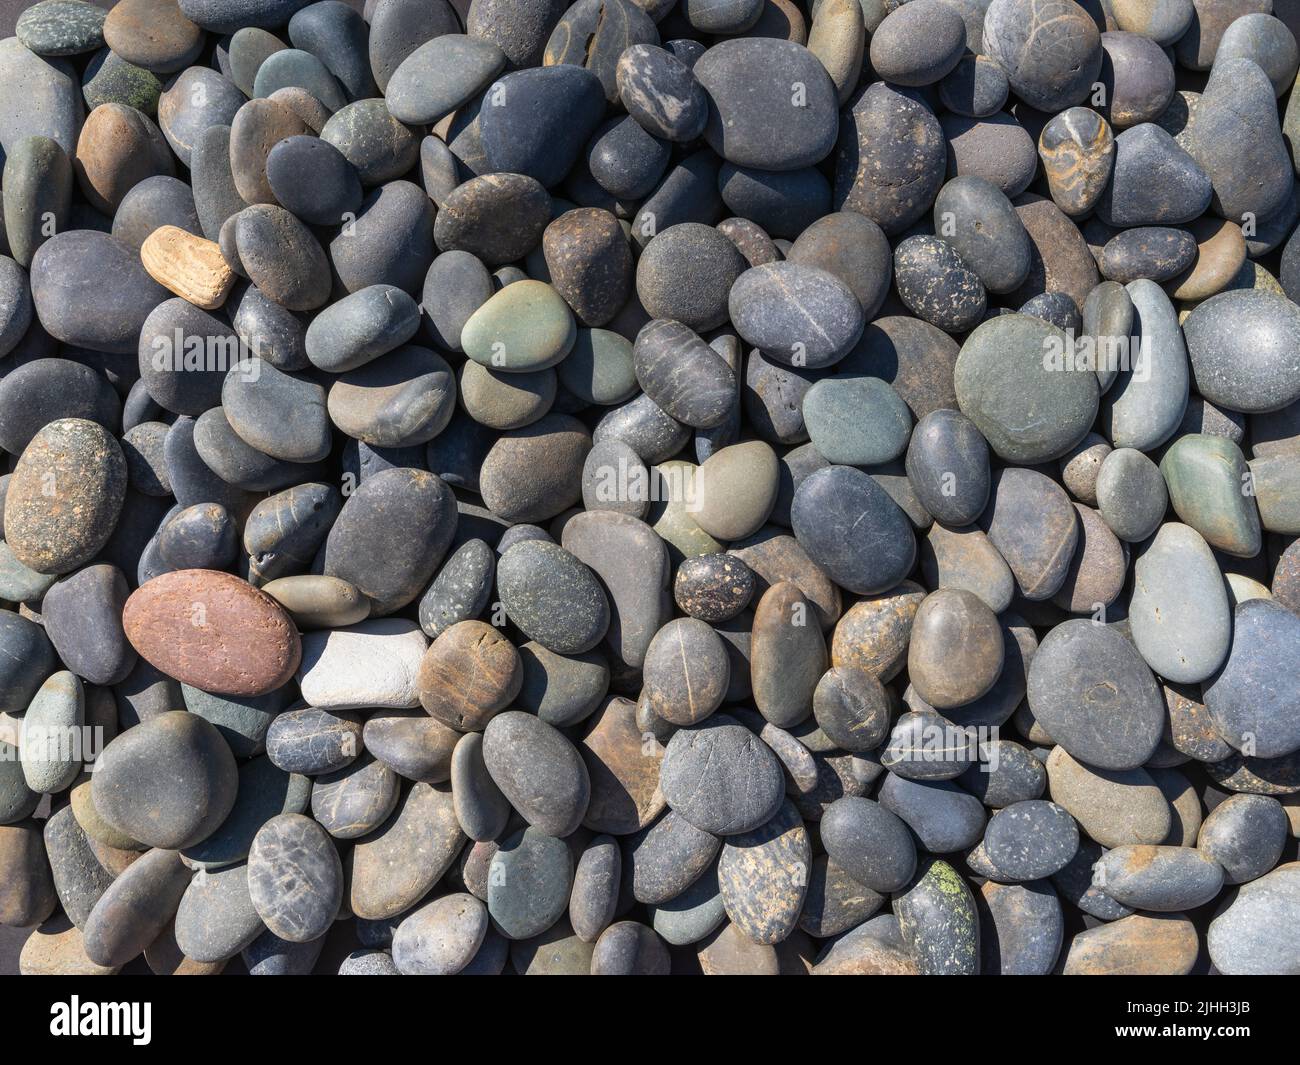 Medium close-up of river stones worn smooth on a river bottom. Stock Photo